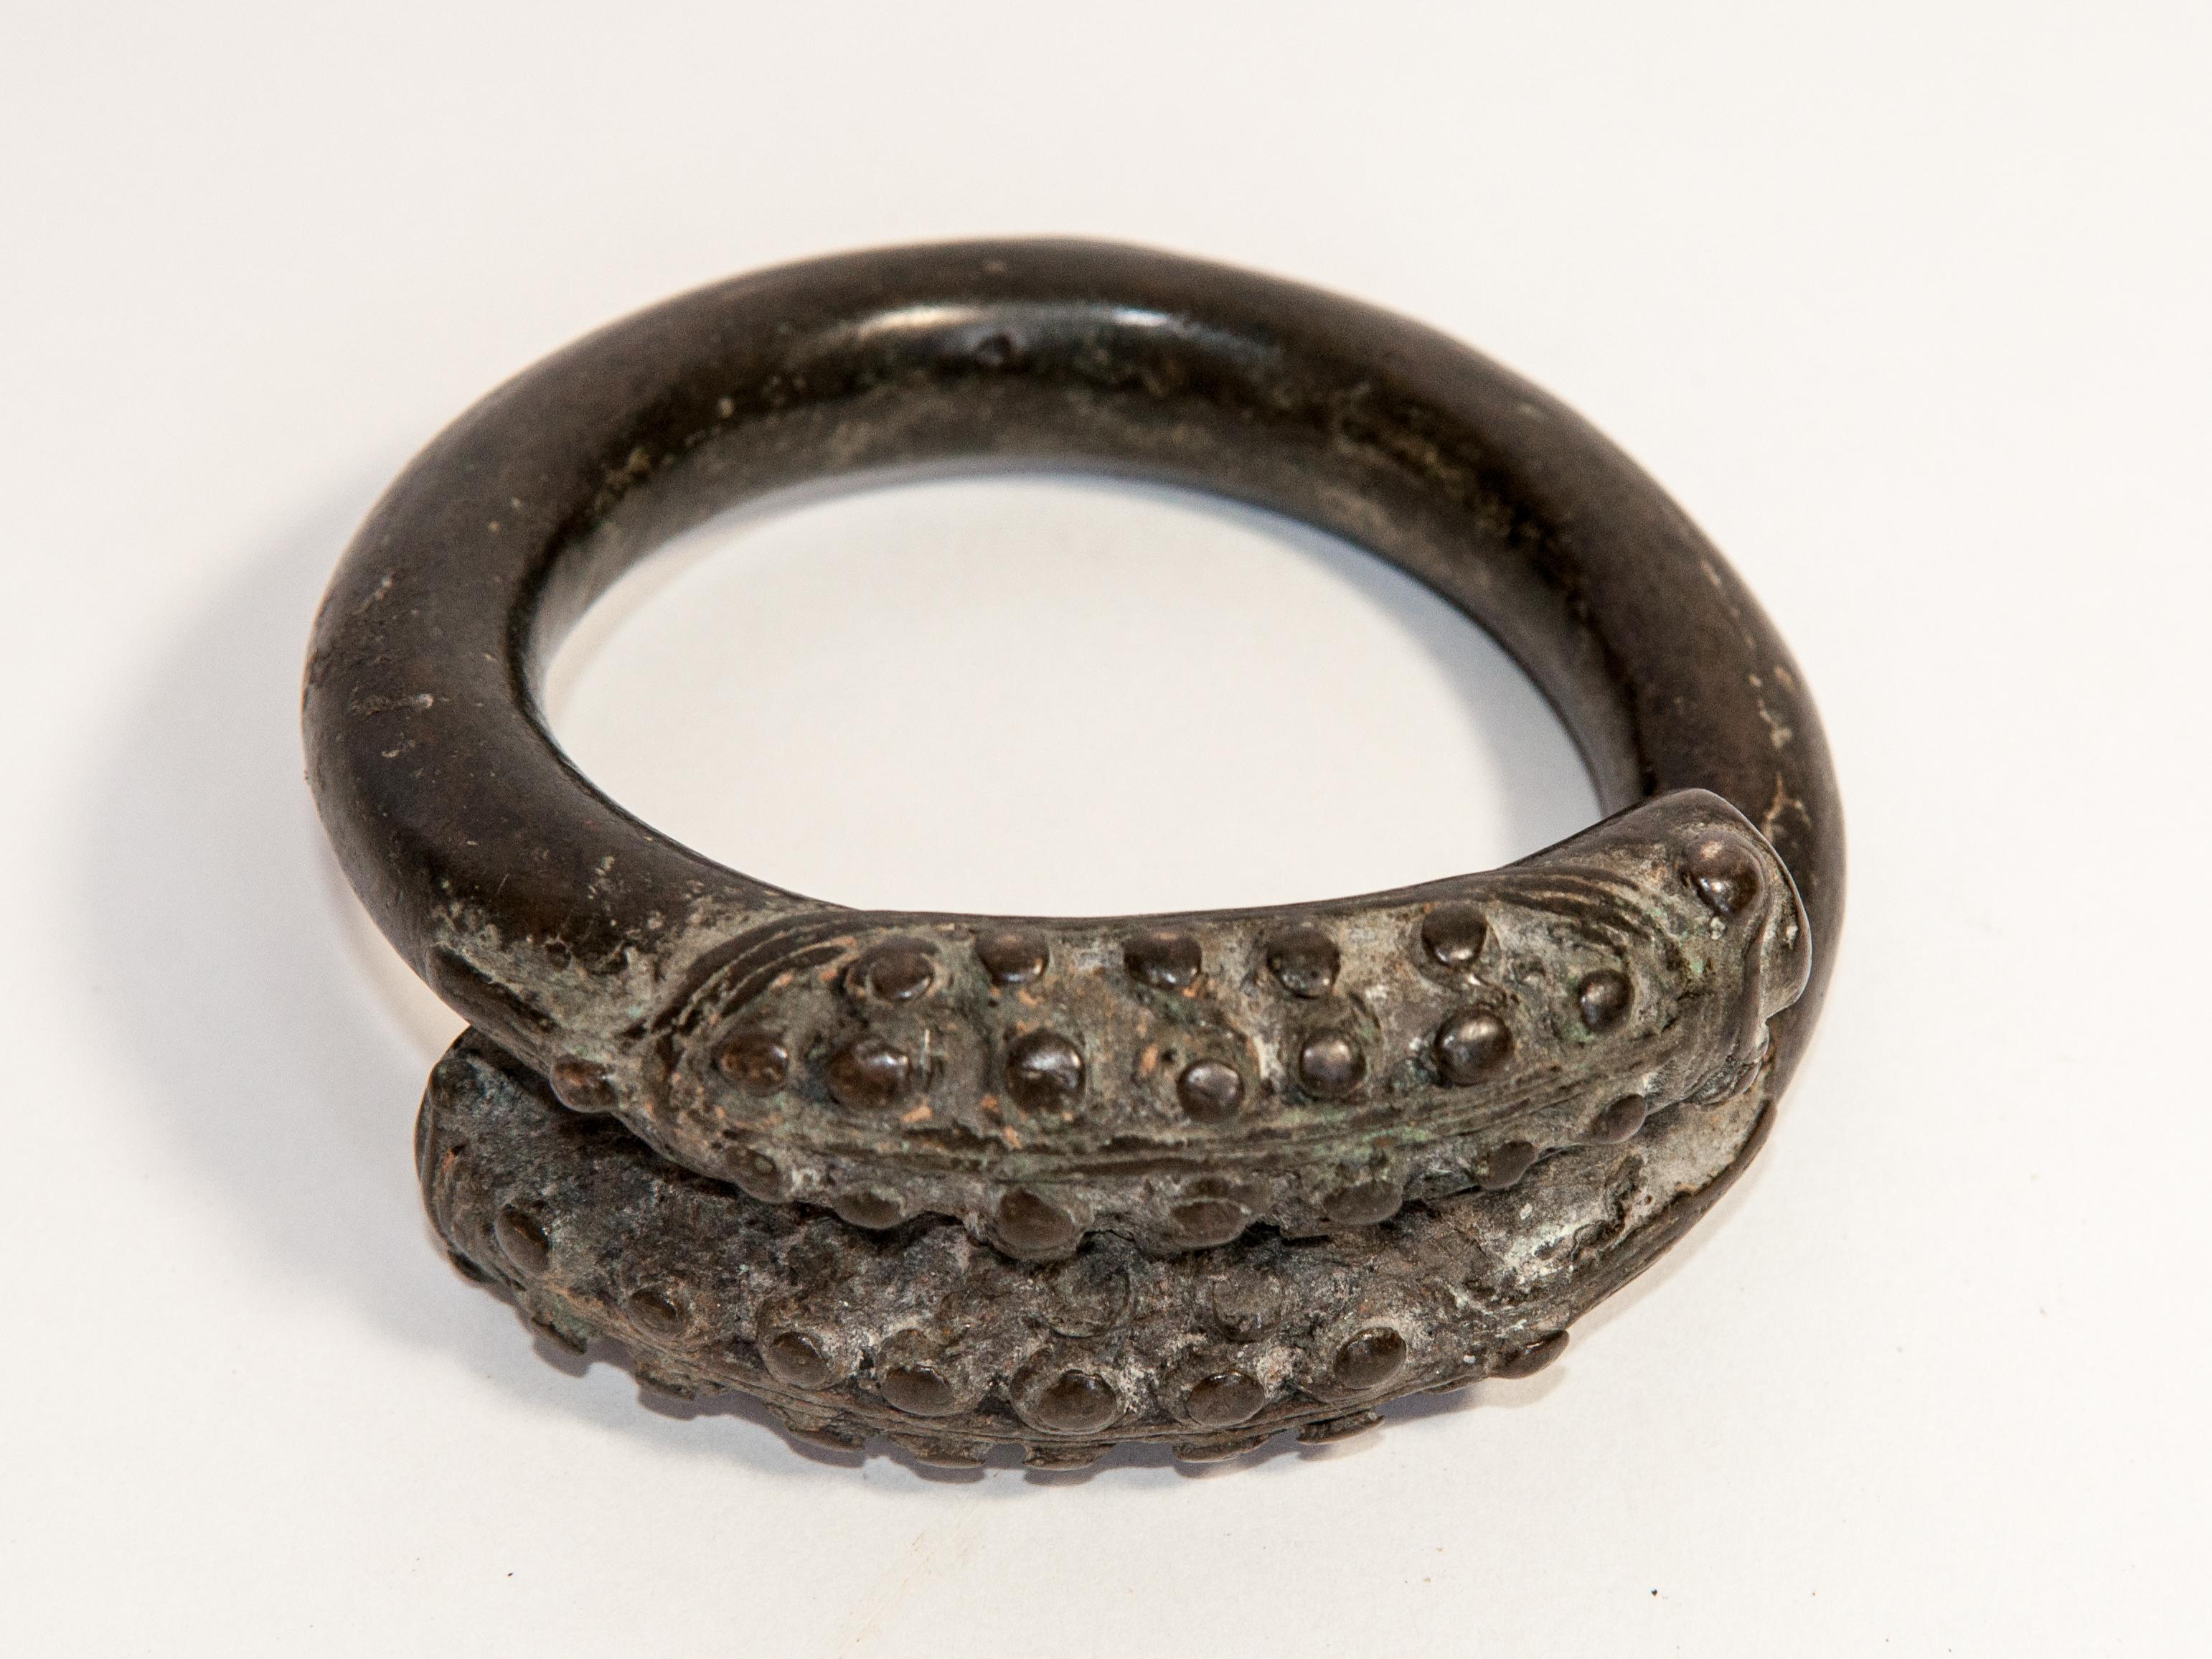 Tribal Antique Bronze Bracelet from Laos with a Naga or Serpent Motif, 18th Century